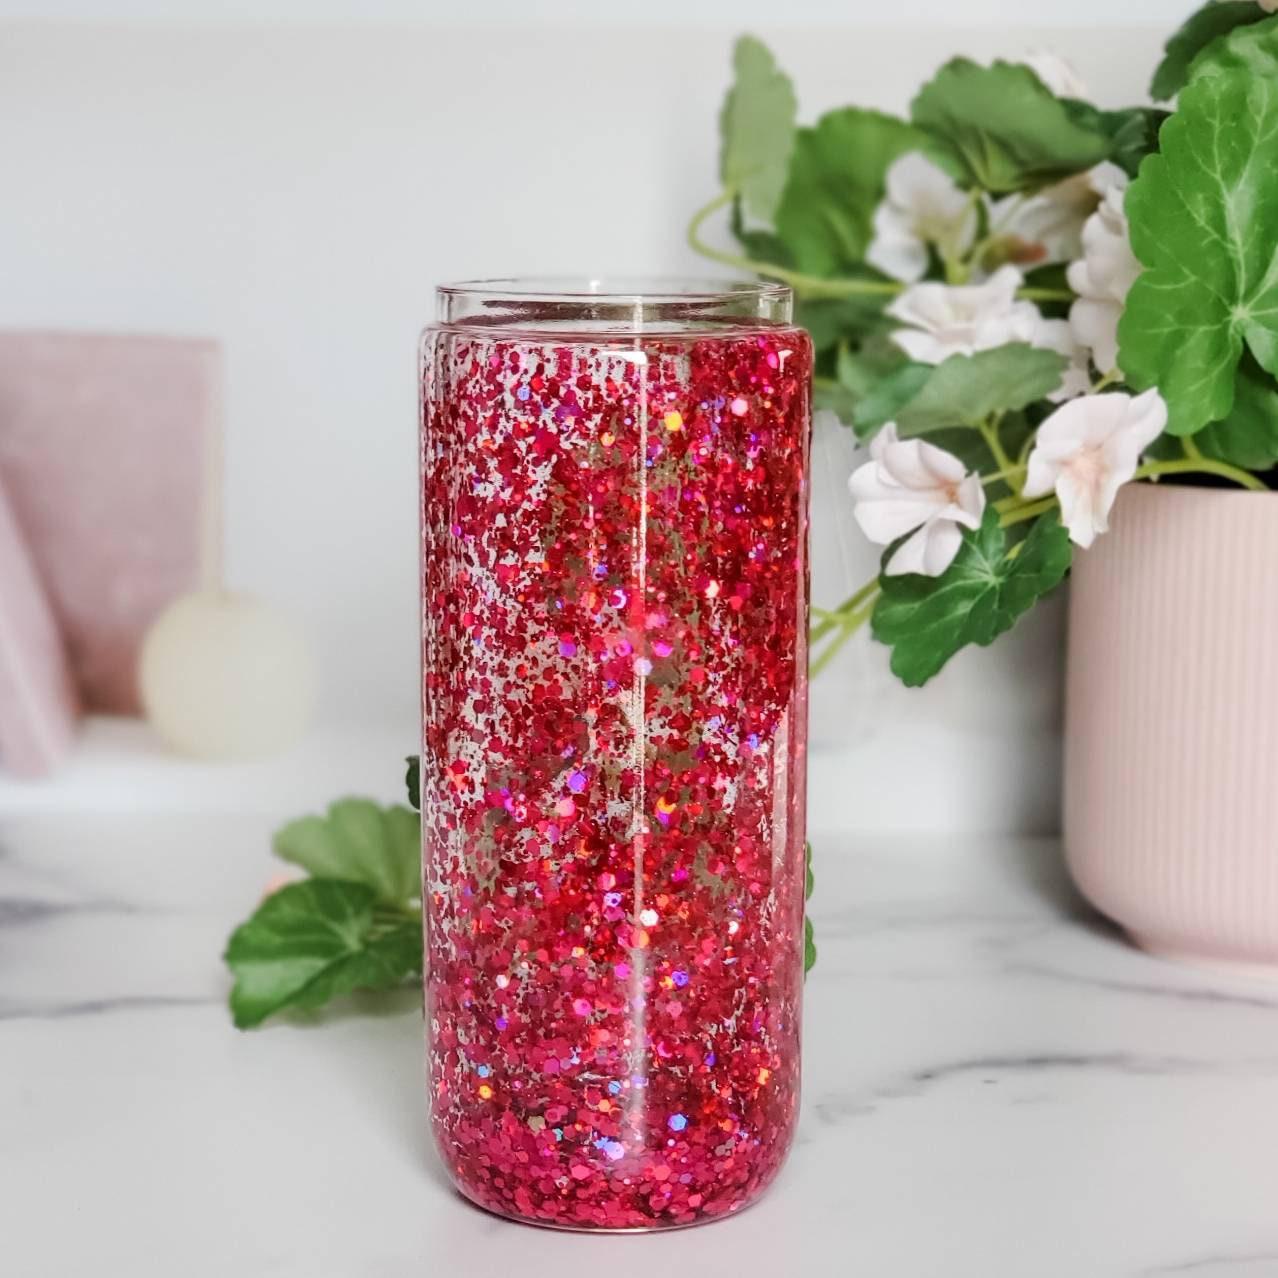 Snowglobe Glass Can Cup Drink Tumbler Salt and Sparkle